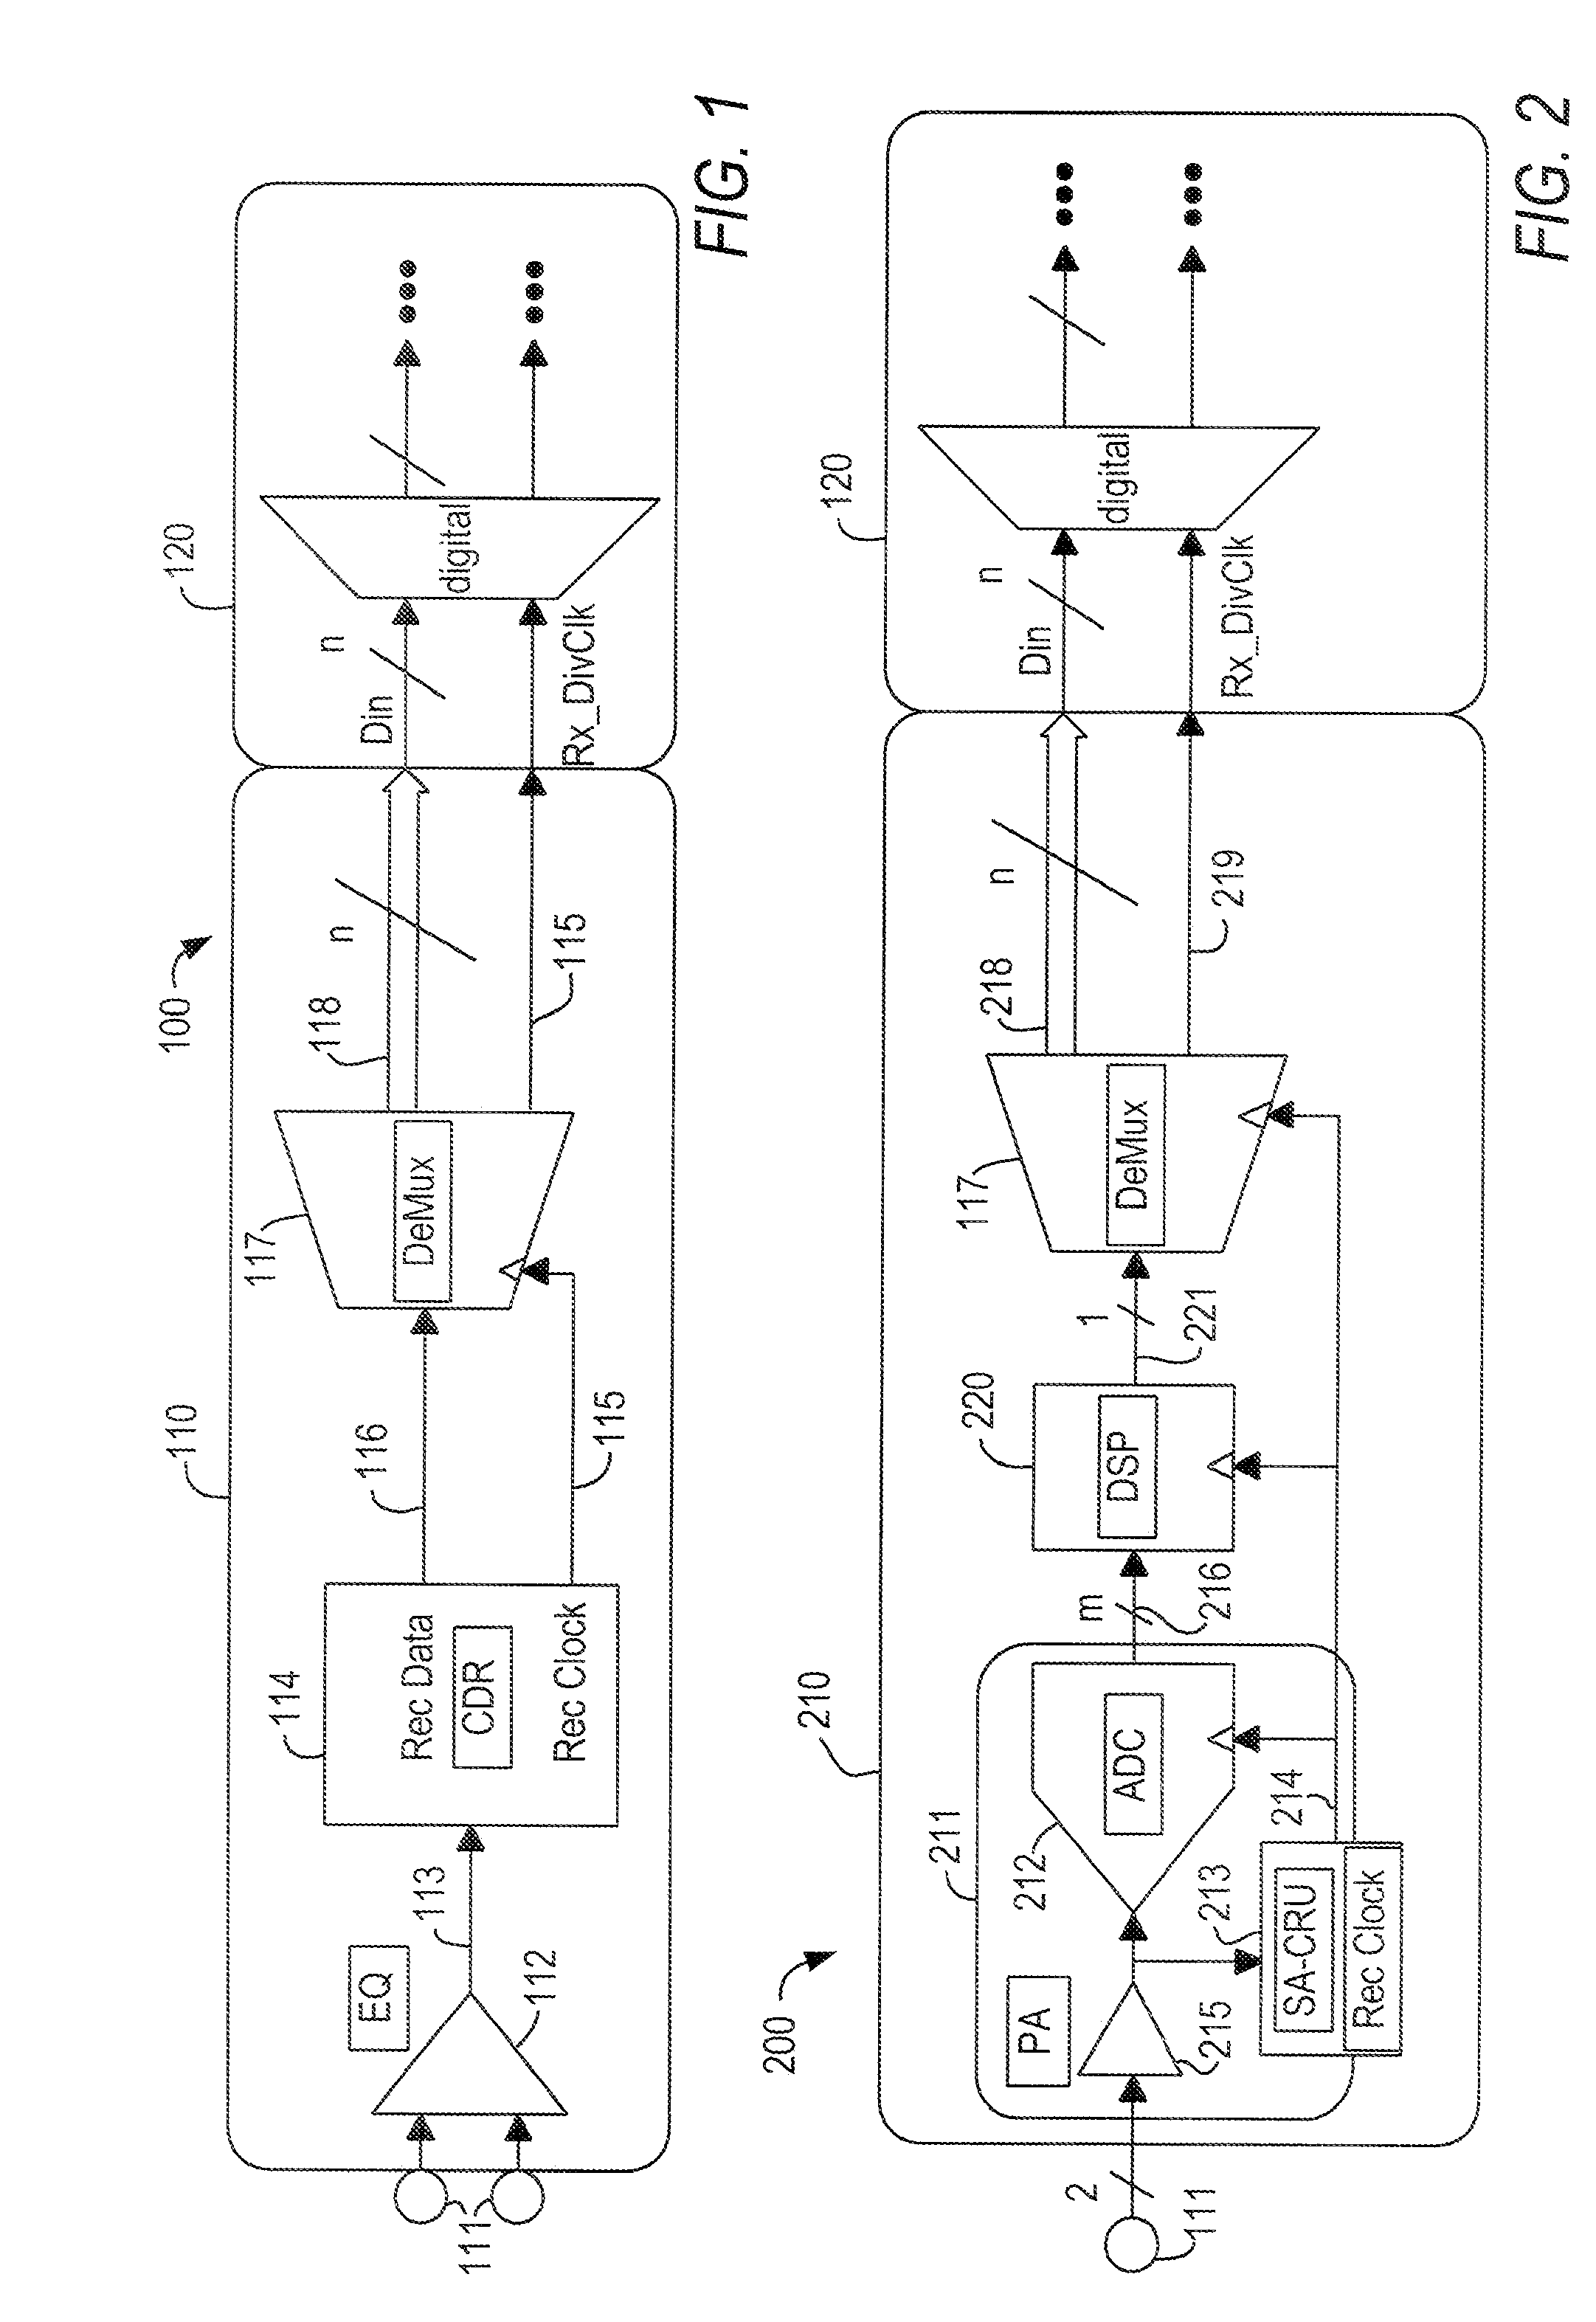 Digital equalizer for high-speed serial communications